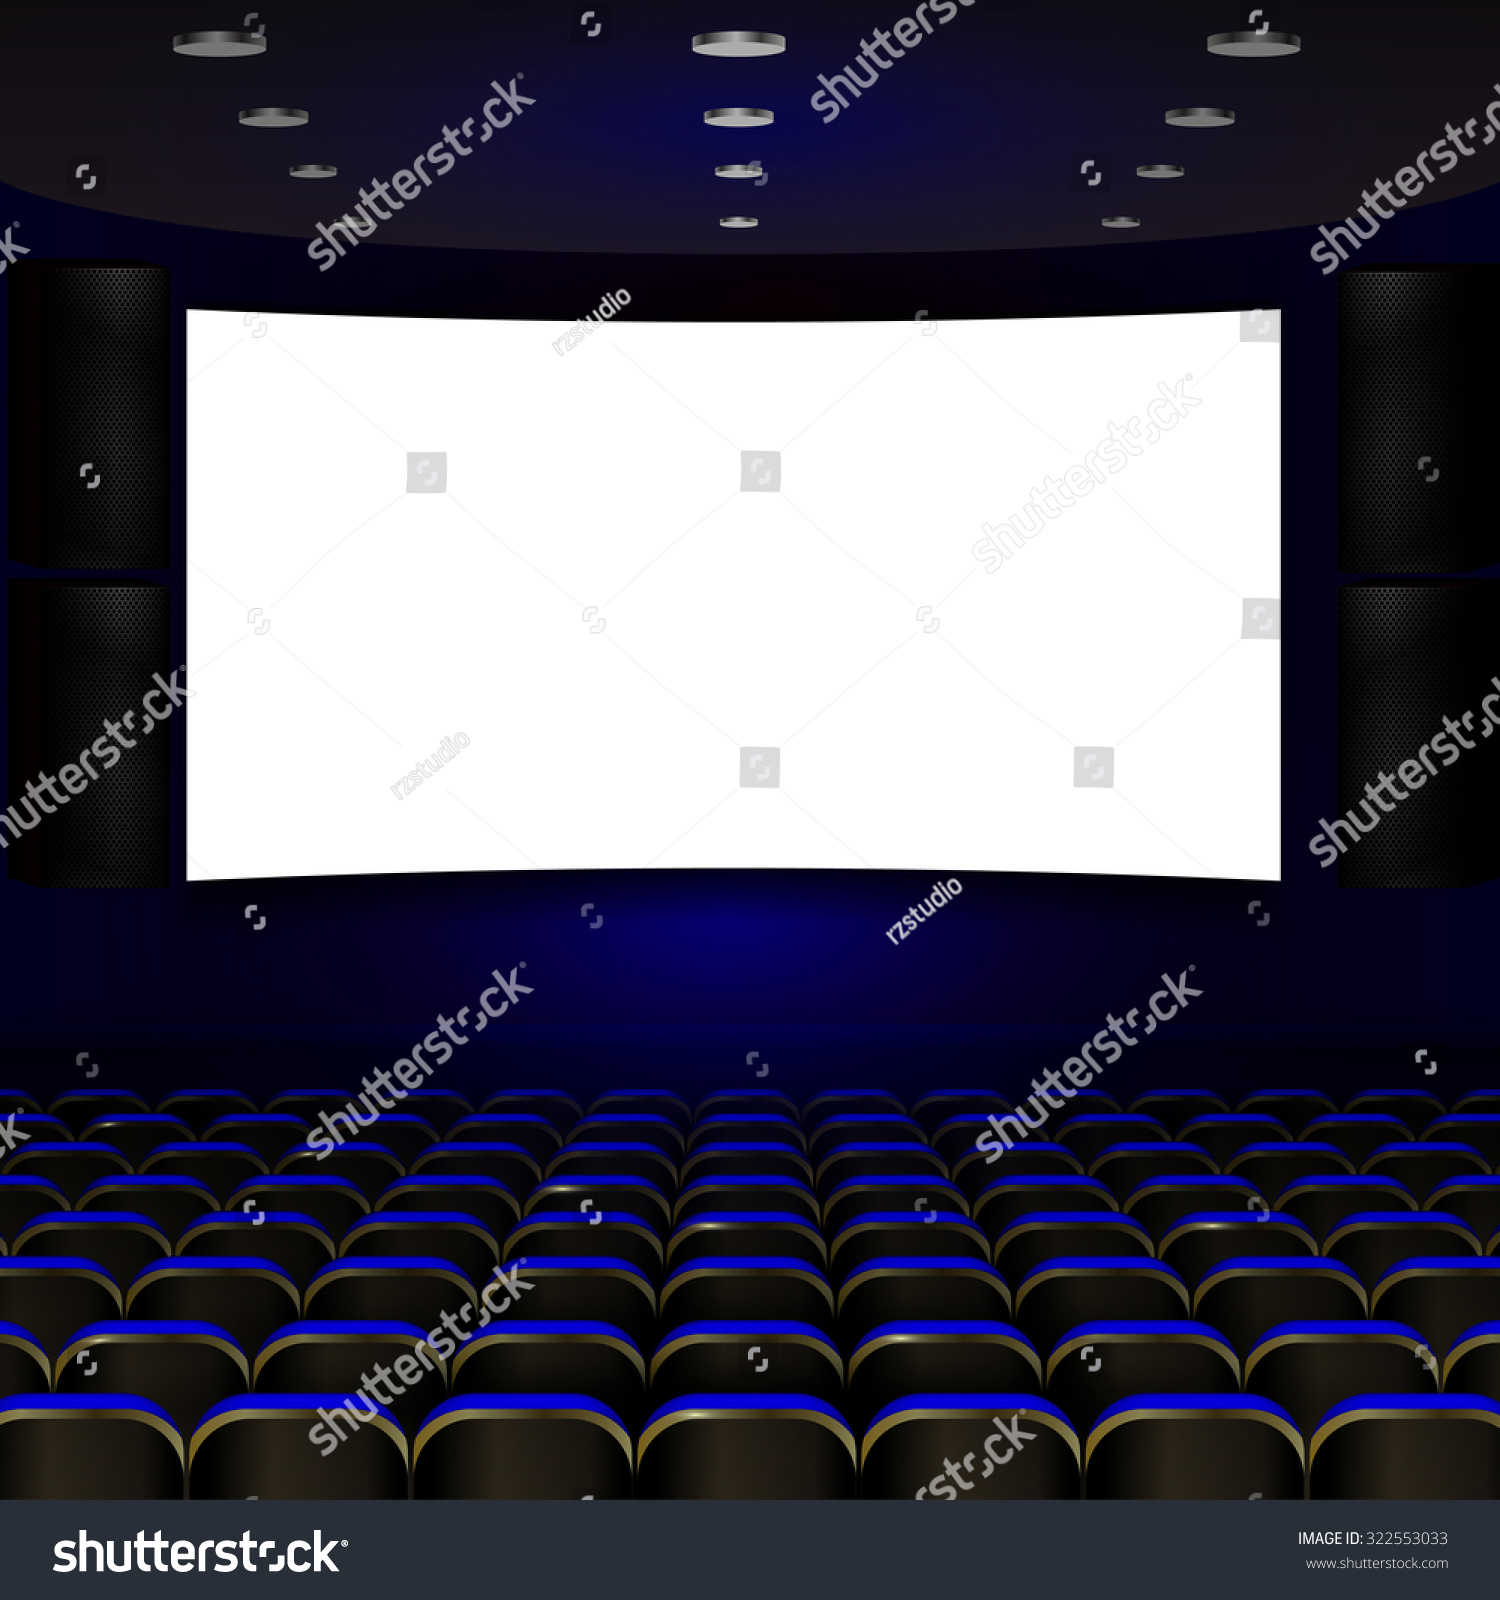 cinema screen with open blue seats #322553033